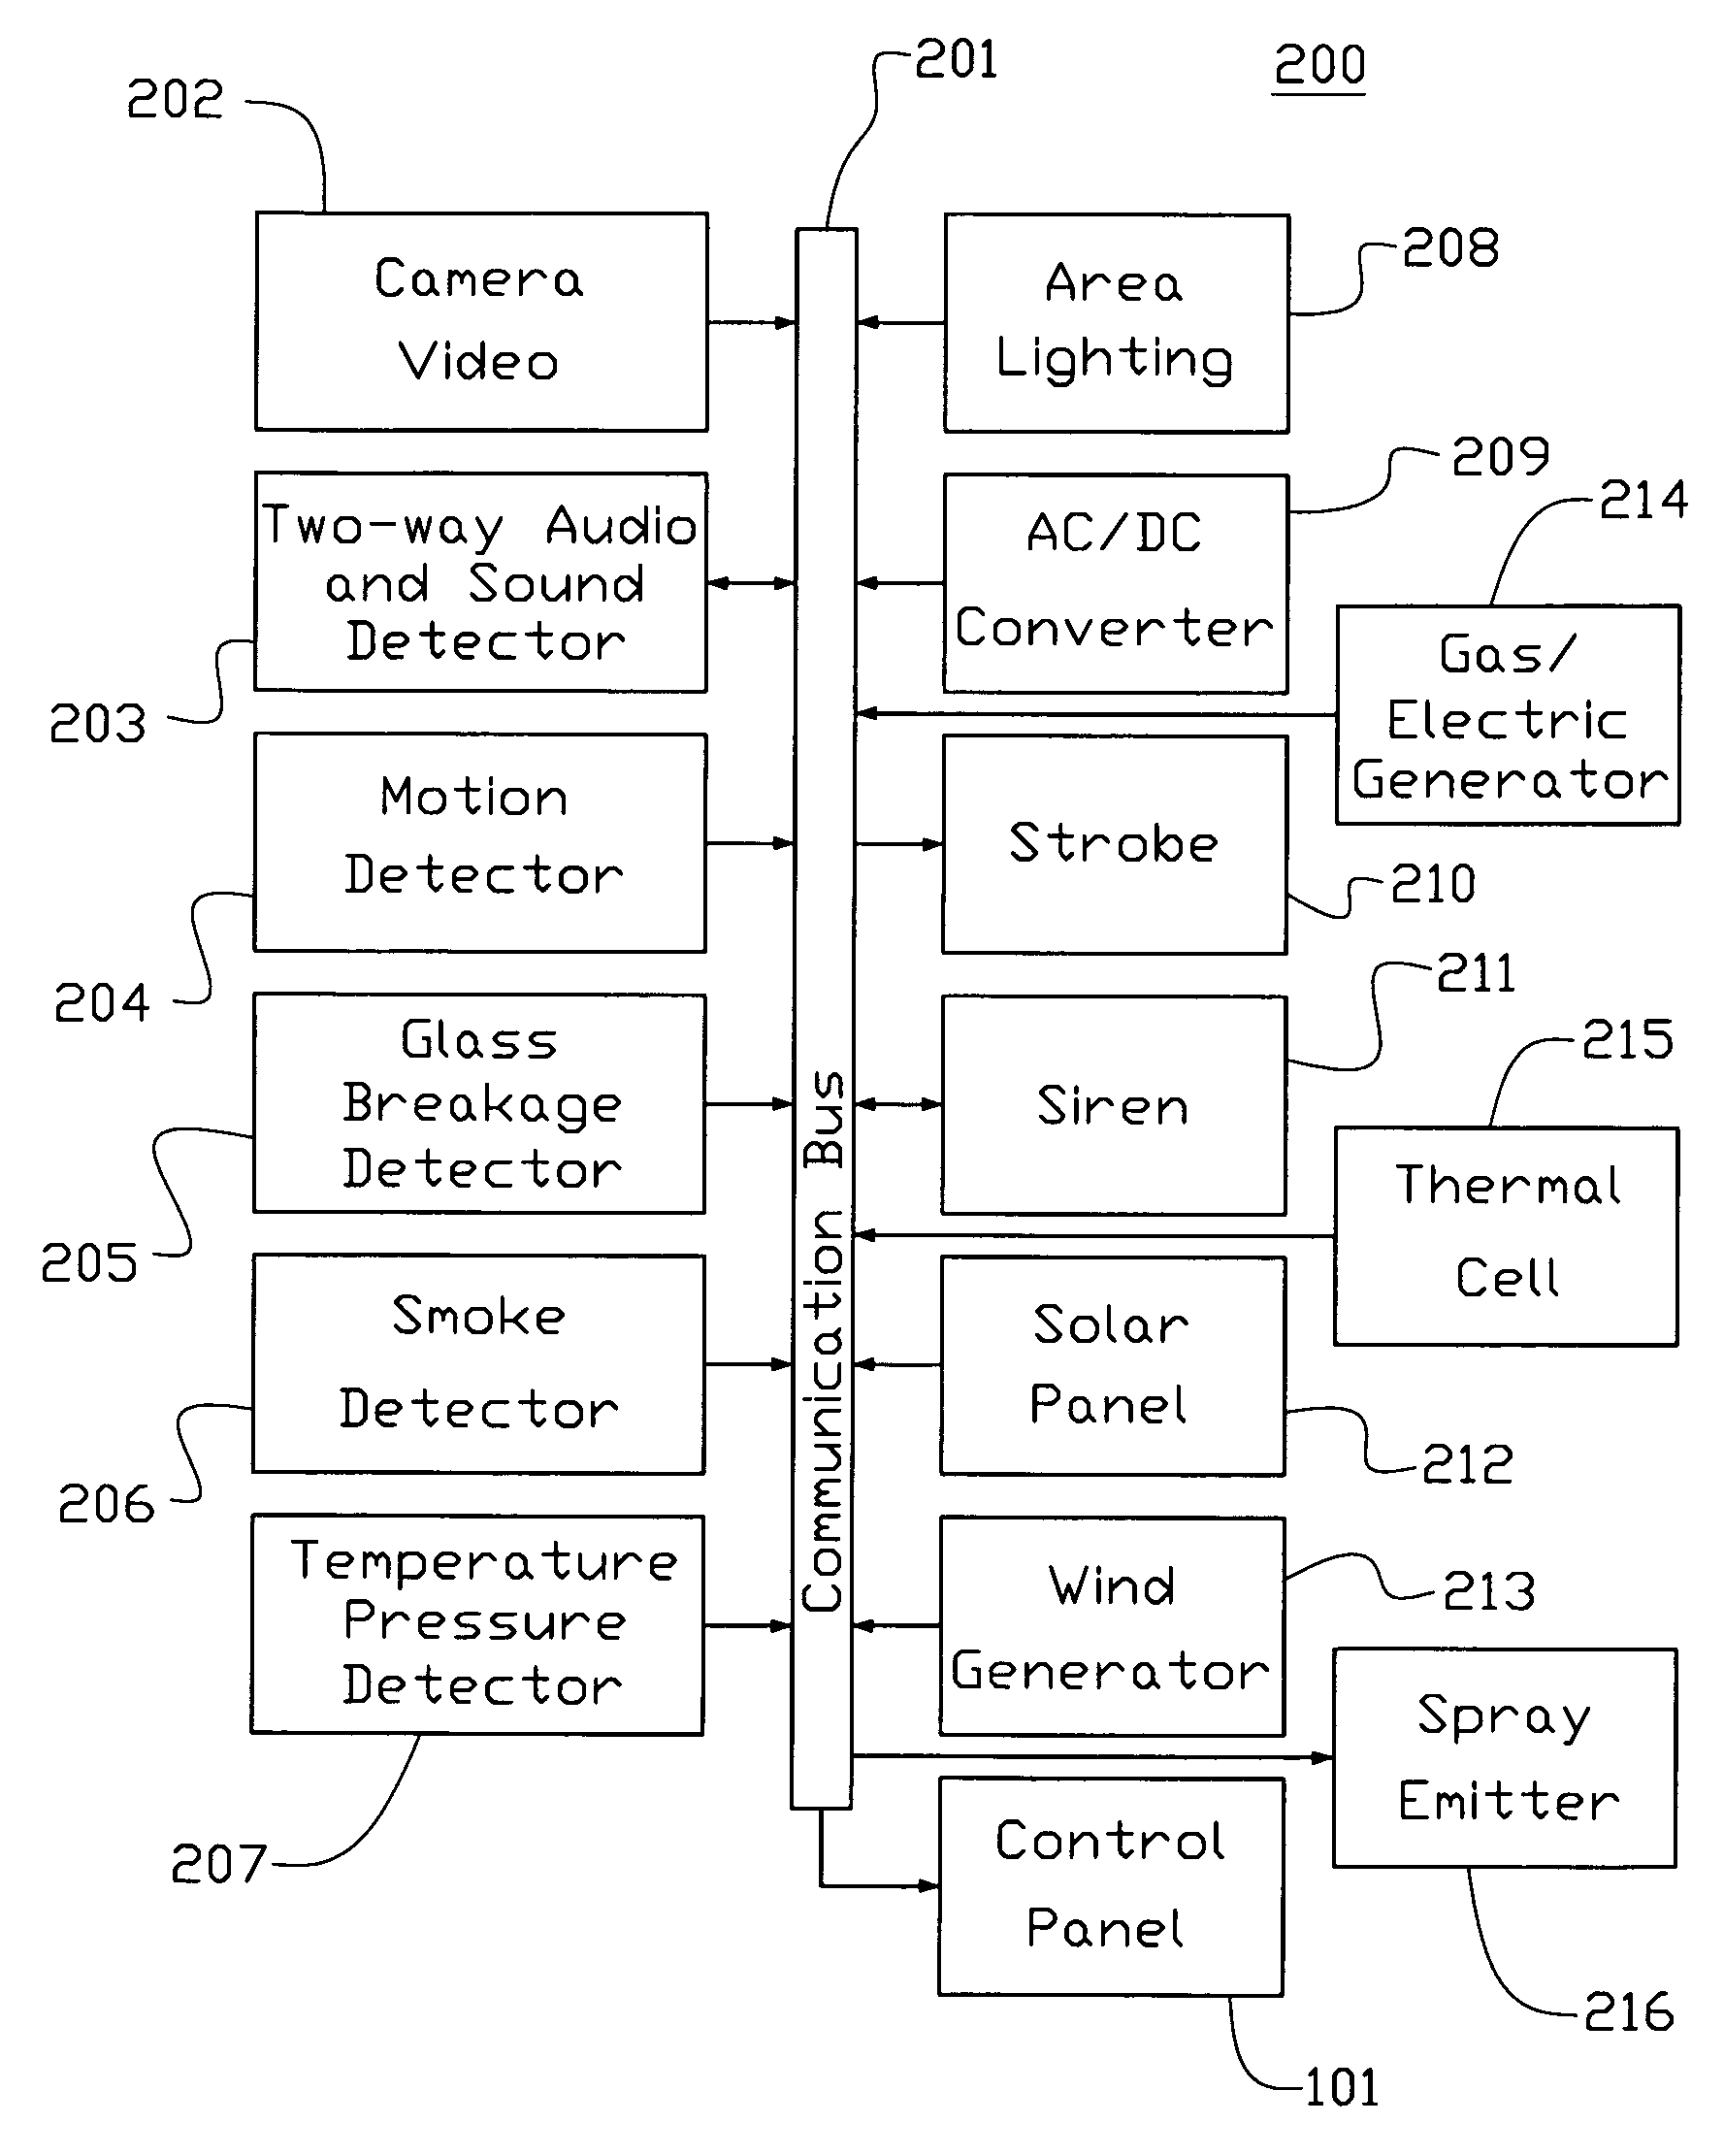 Method for detecting events at a secured location